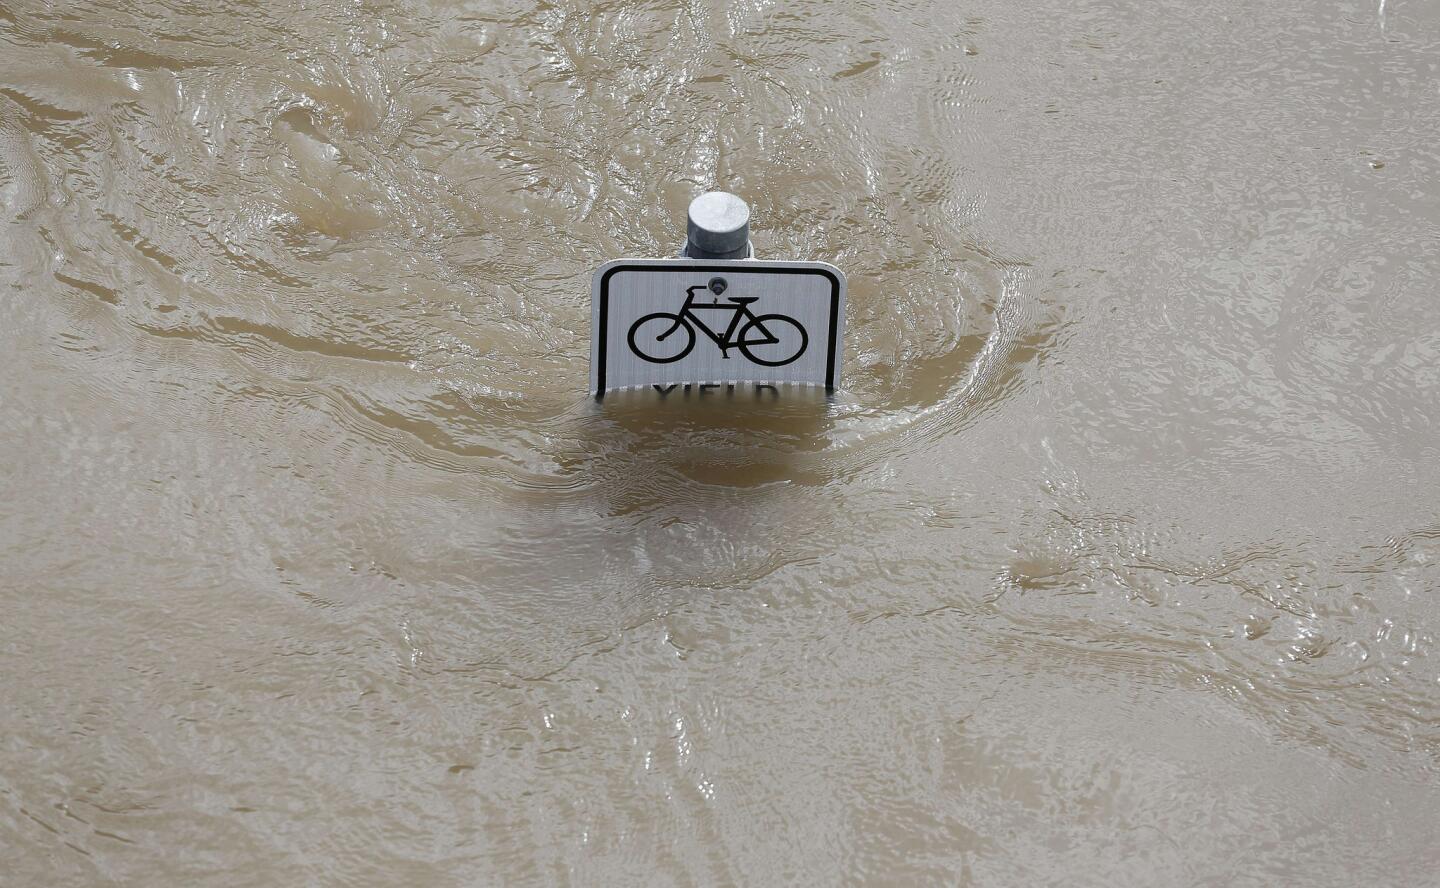 Water is seen at the top of a sign along a bike path near Memorial Drive in Houston, Texas on May 26, 2015.